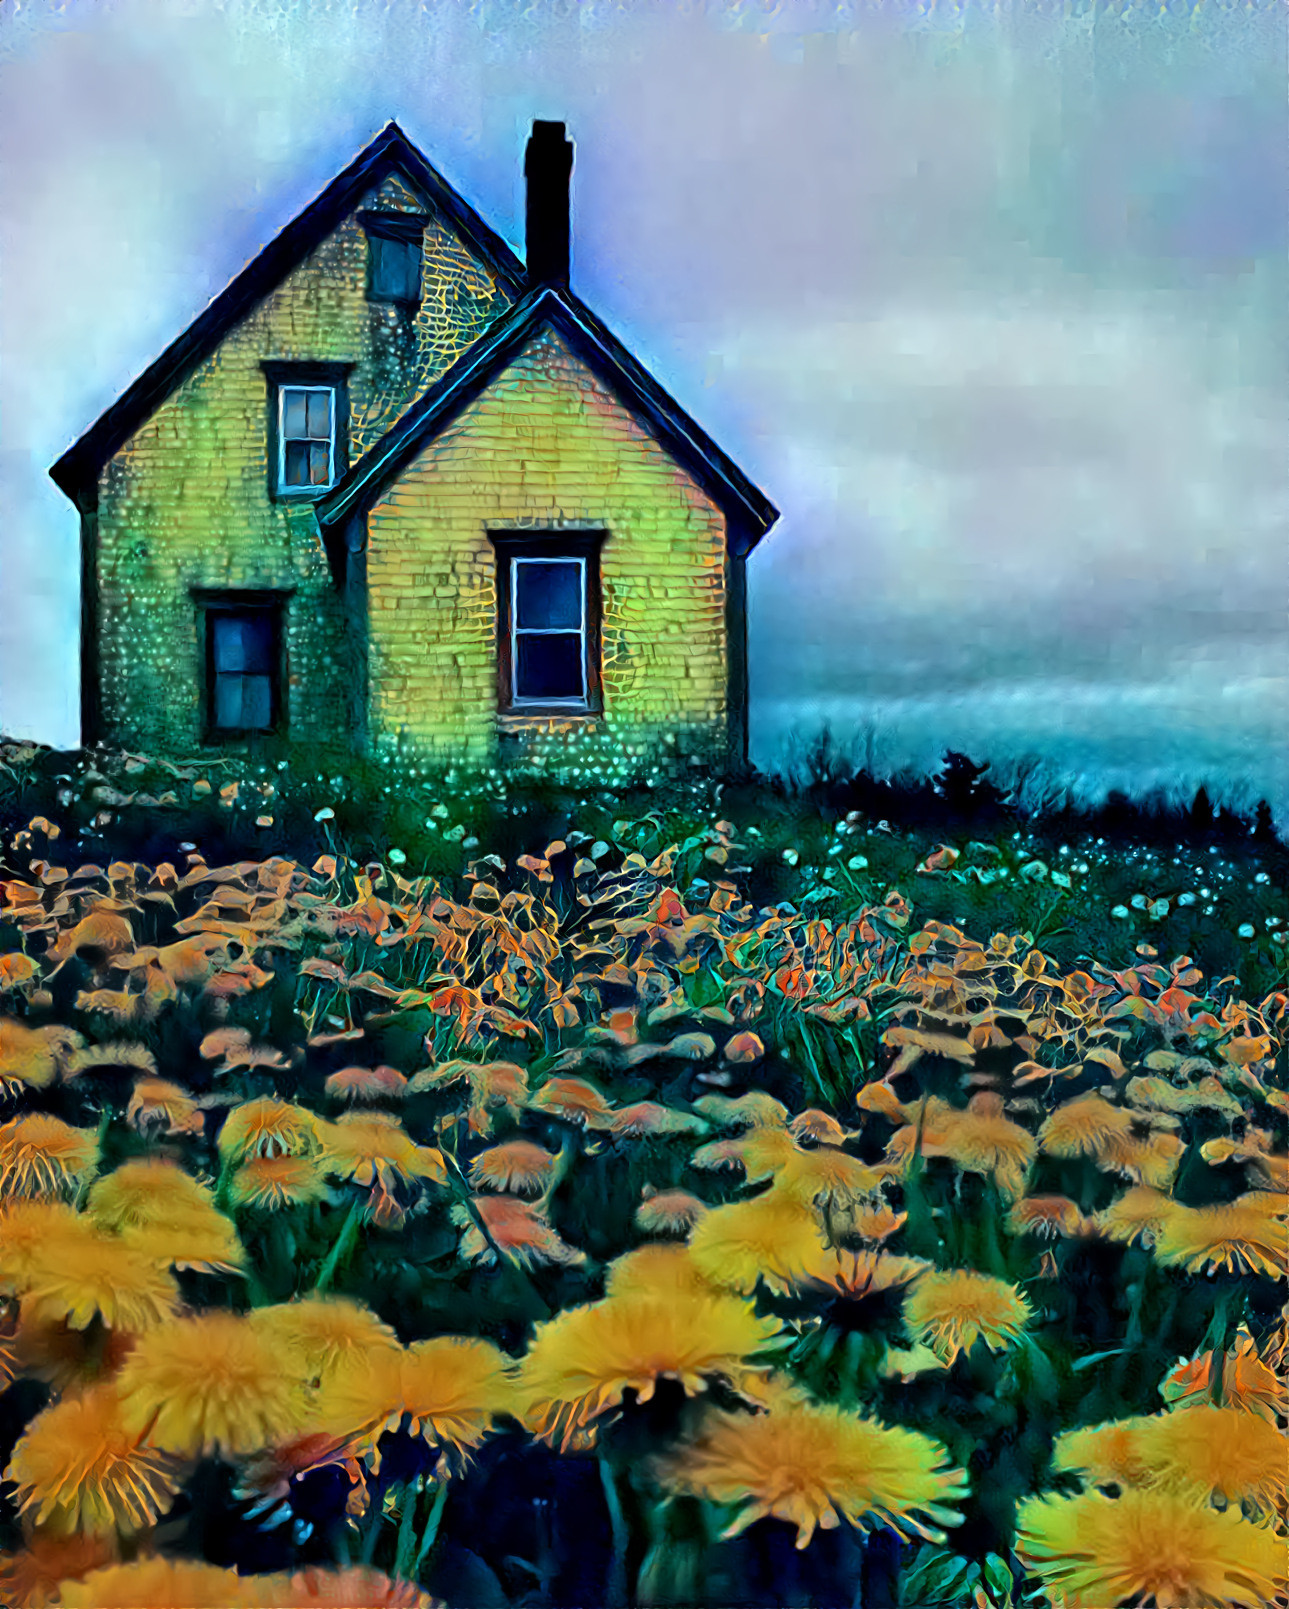 Flowers keeping a lonely house company